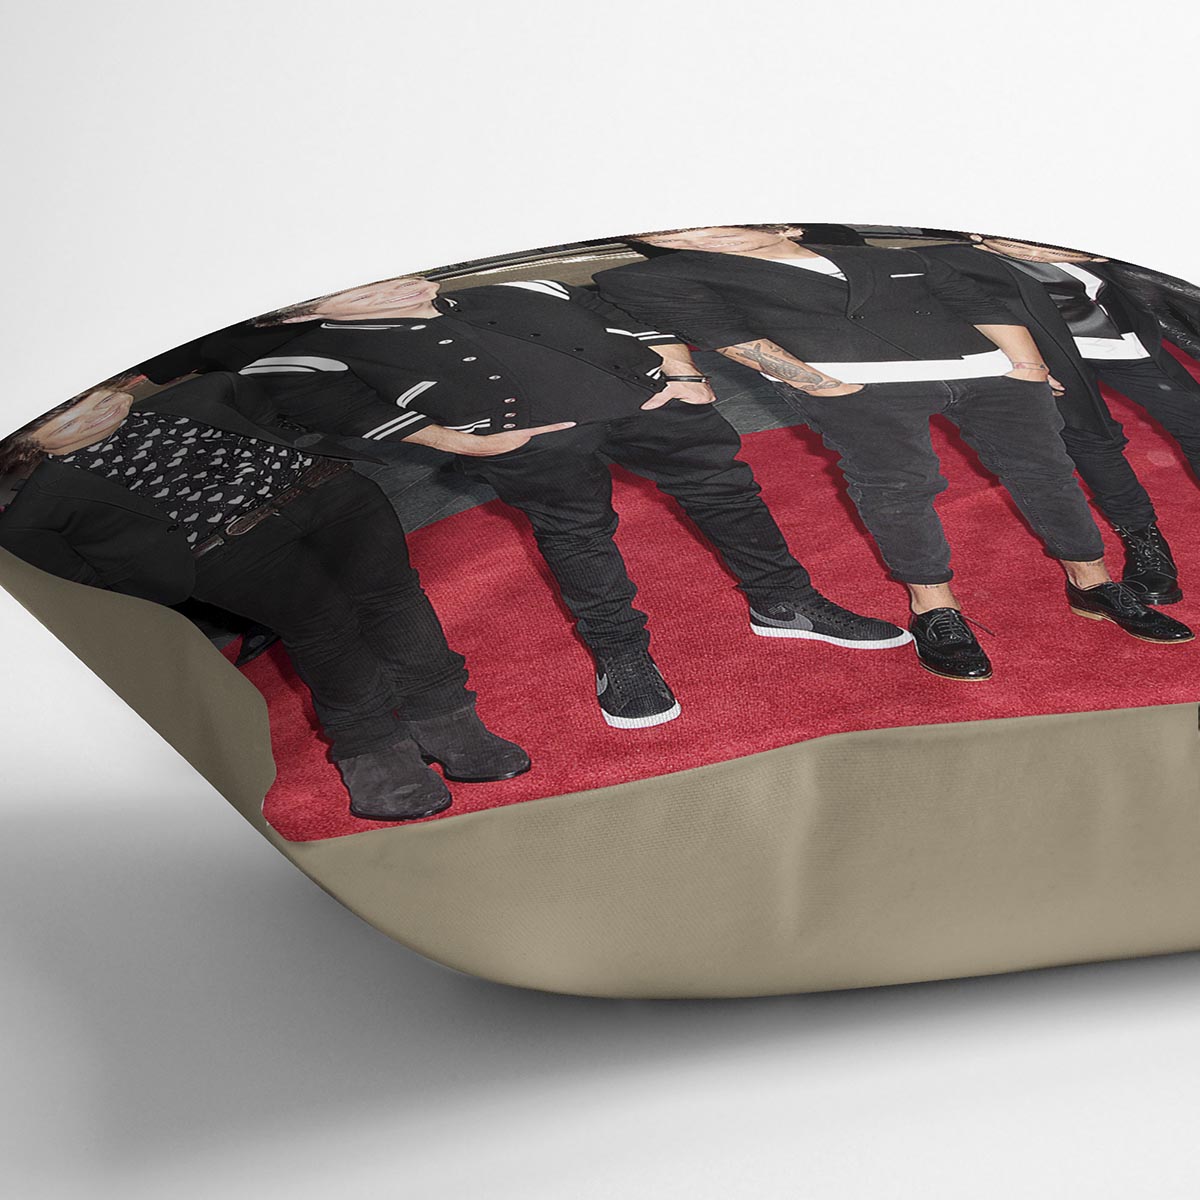 One Direction on the red carpet Cushion